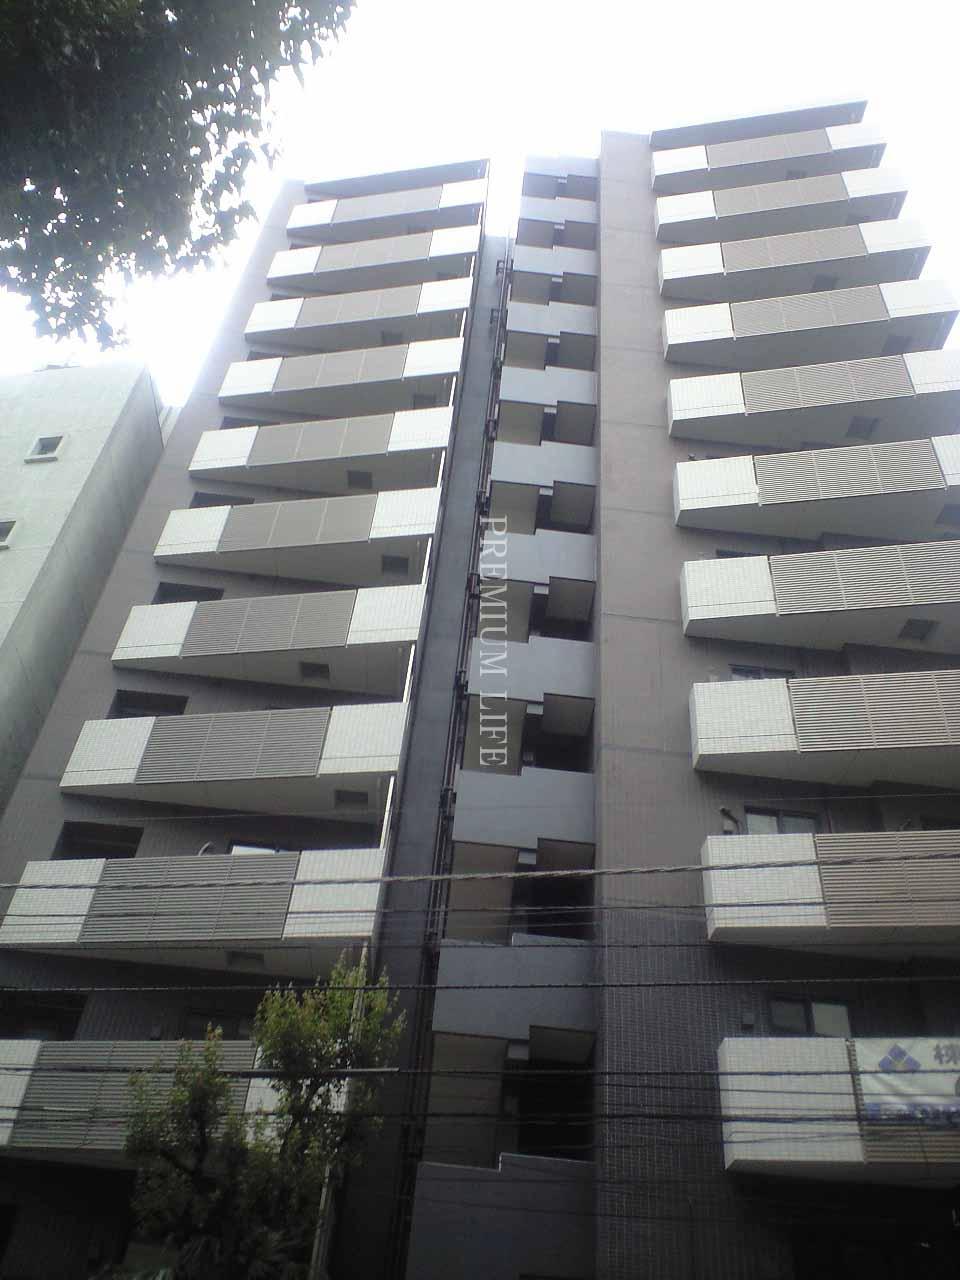 Local appearance photo.  [appearance] The appearance of the chic two-tone color. The rooms are located on the 8th floor part.